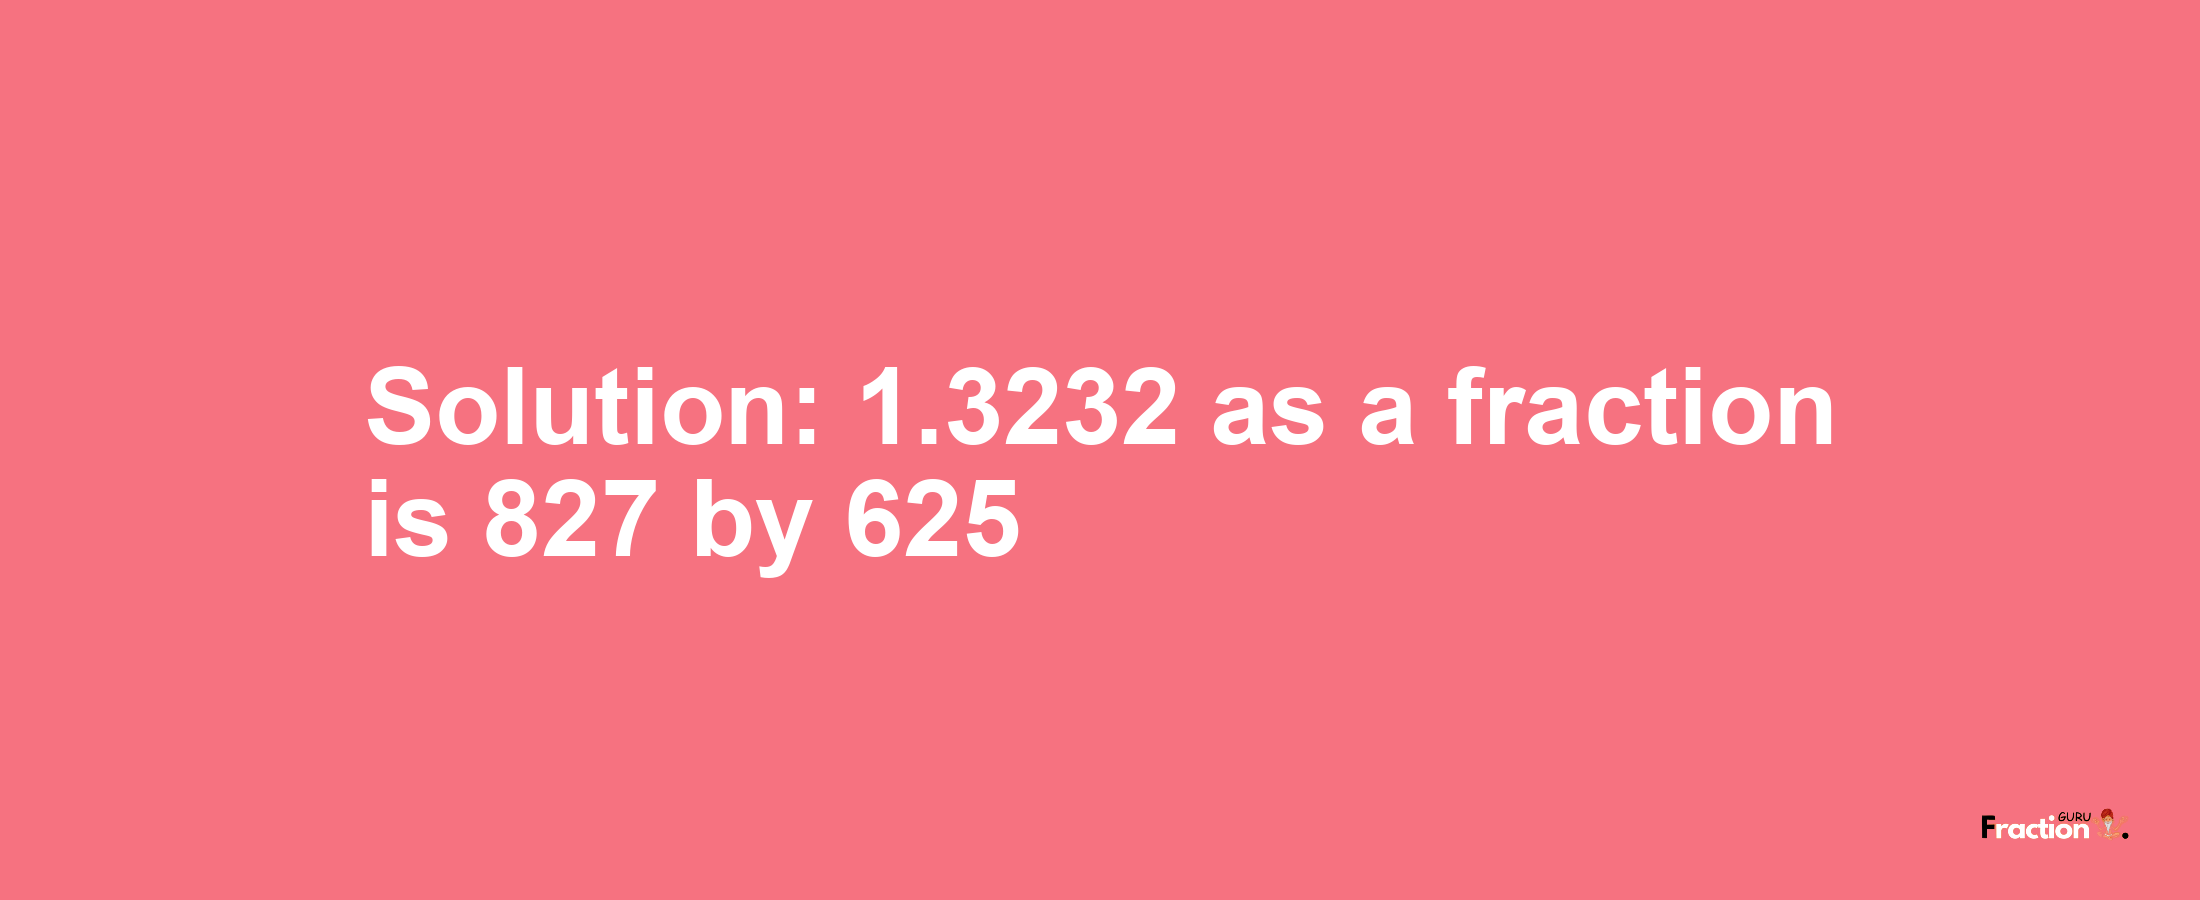 Solution:1.3232 as a fraction is 827/625